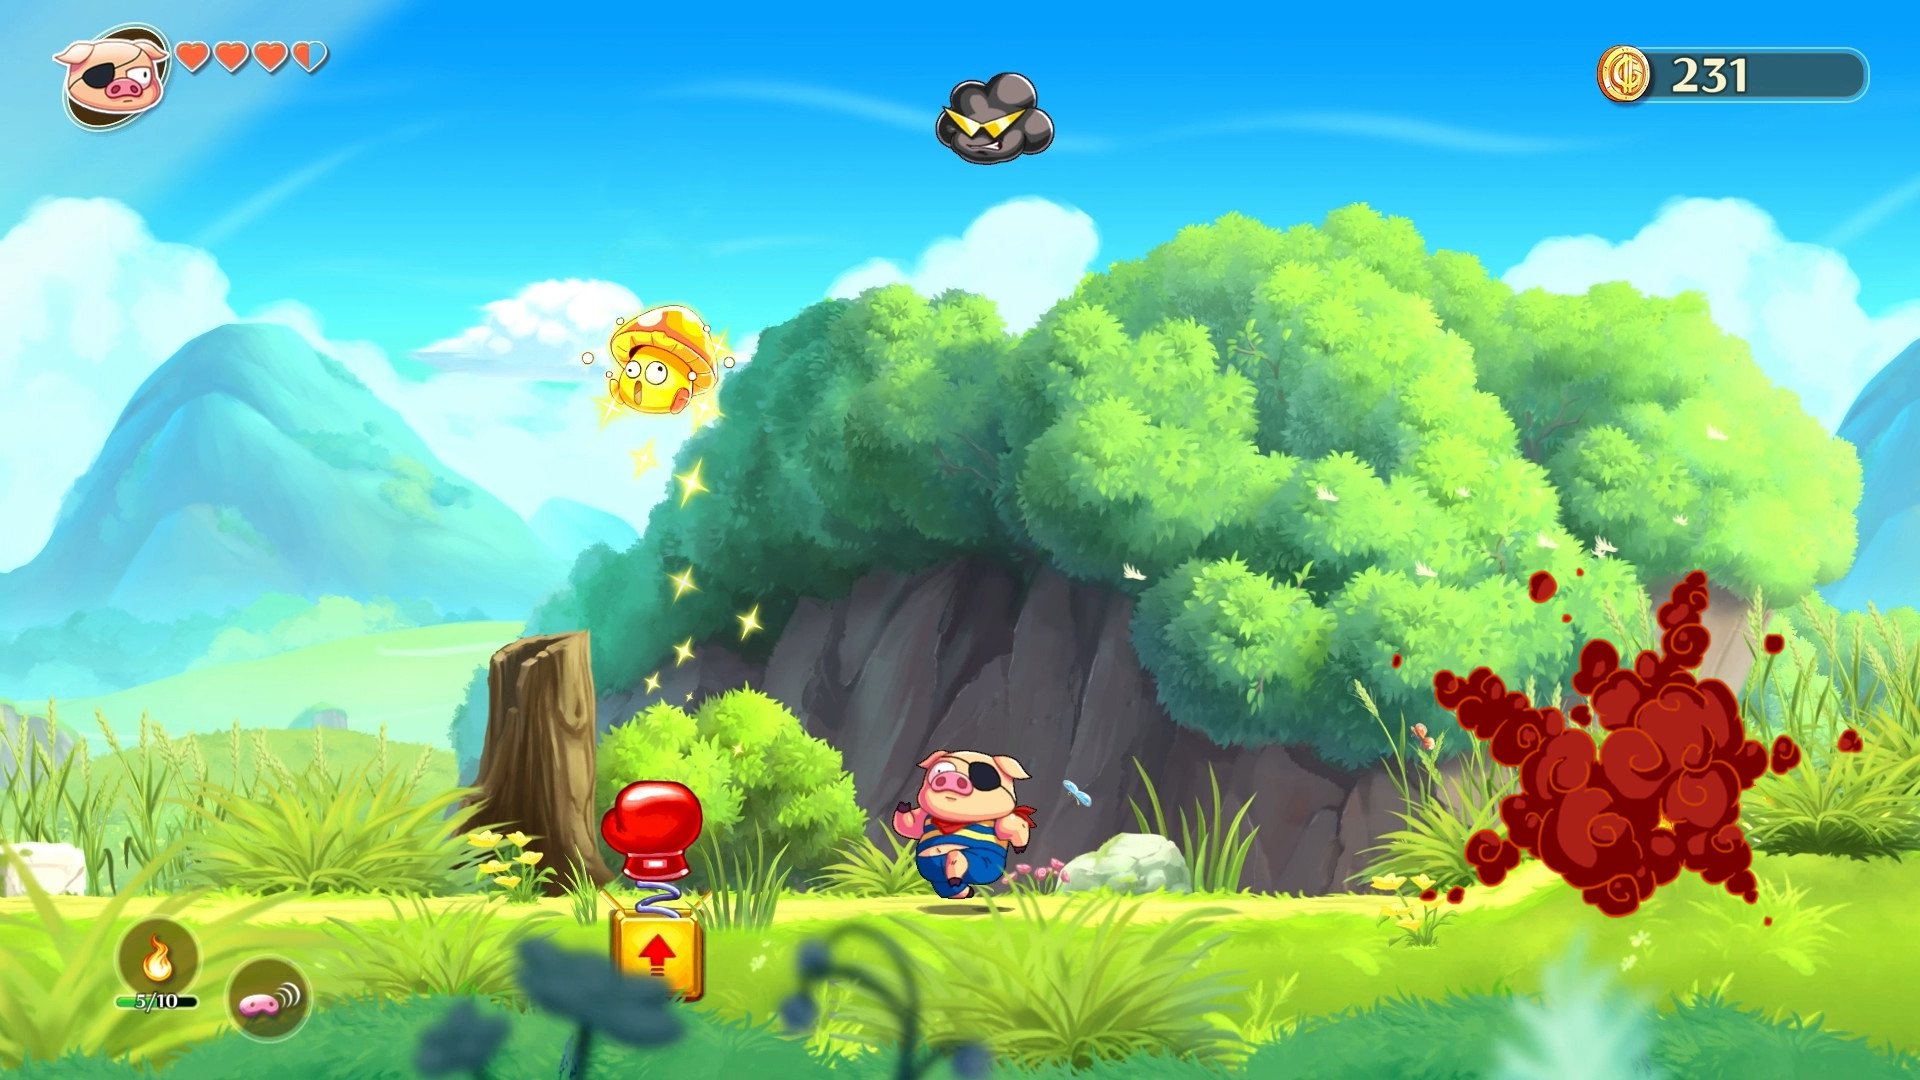 Monster Boy and the Cursed Kingdom Free Download